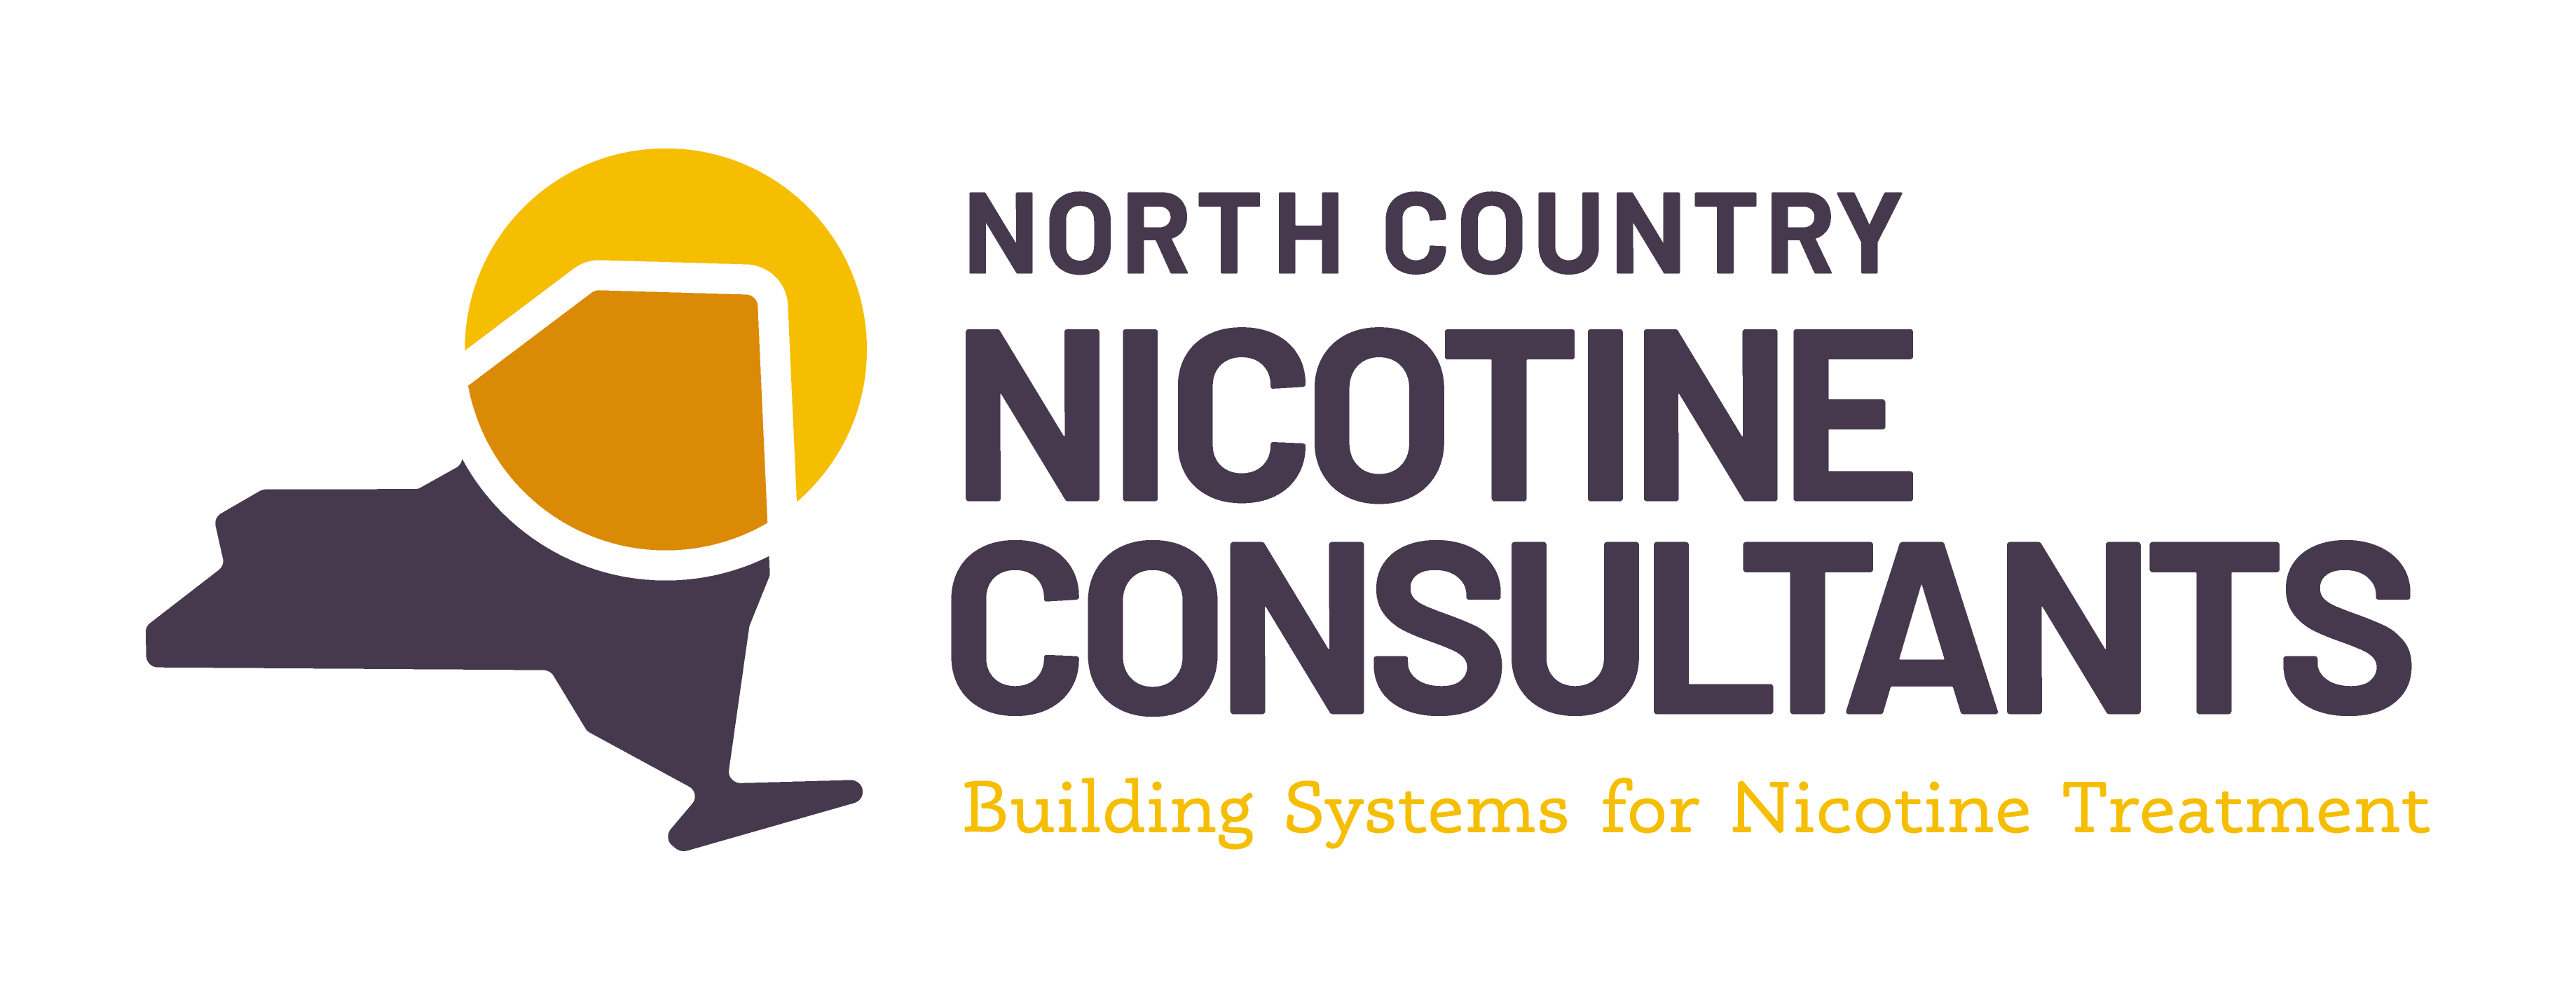 North Country Nicotine Consultants